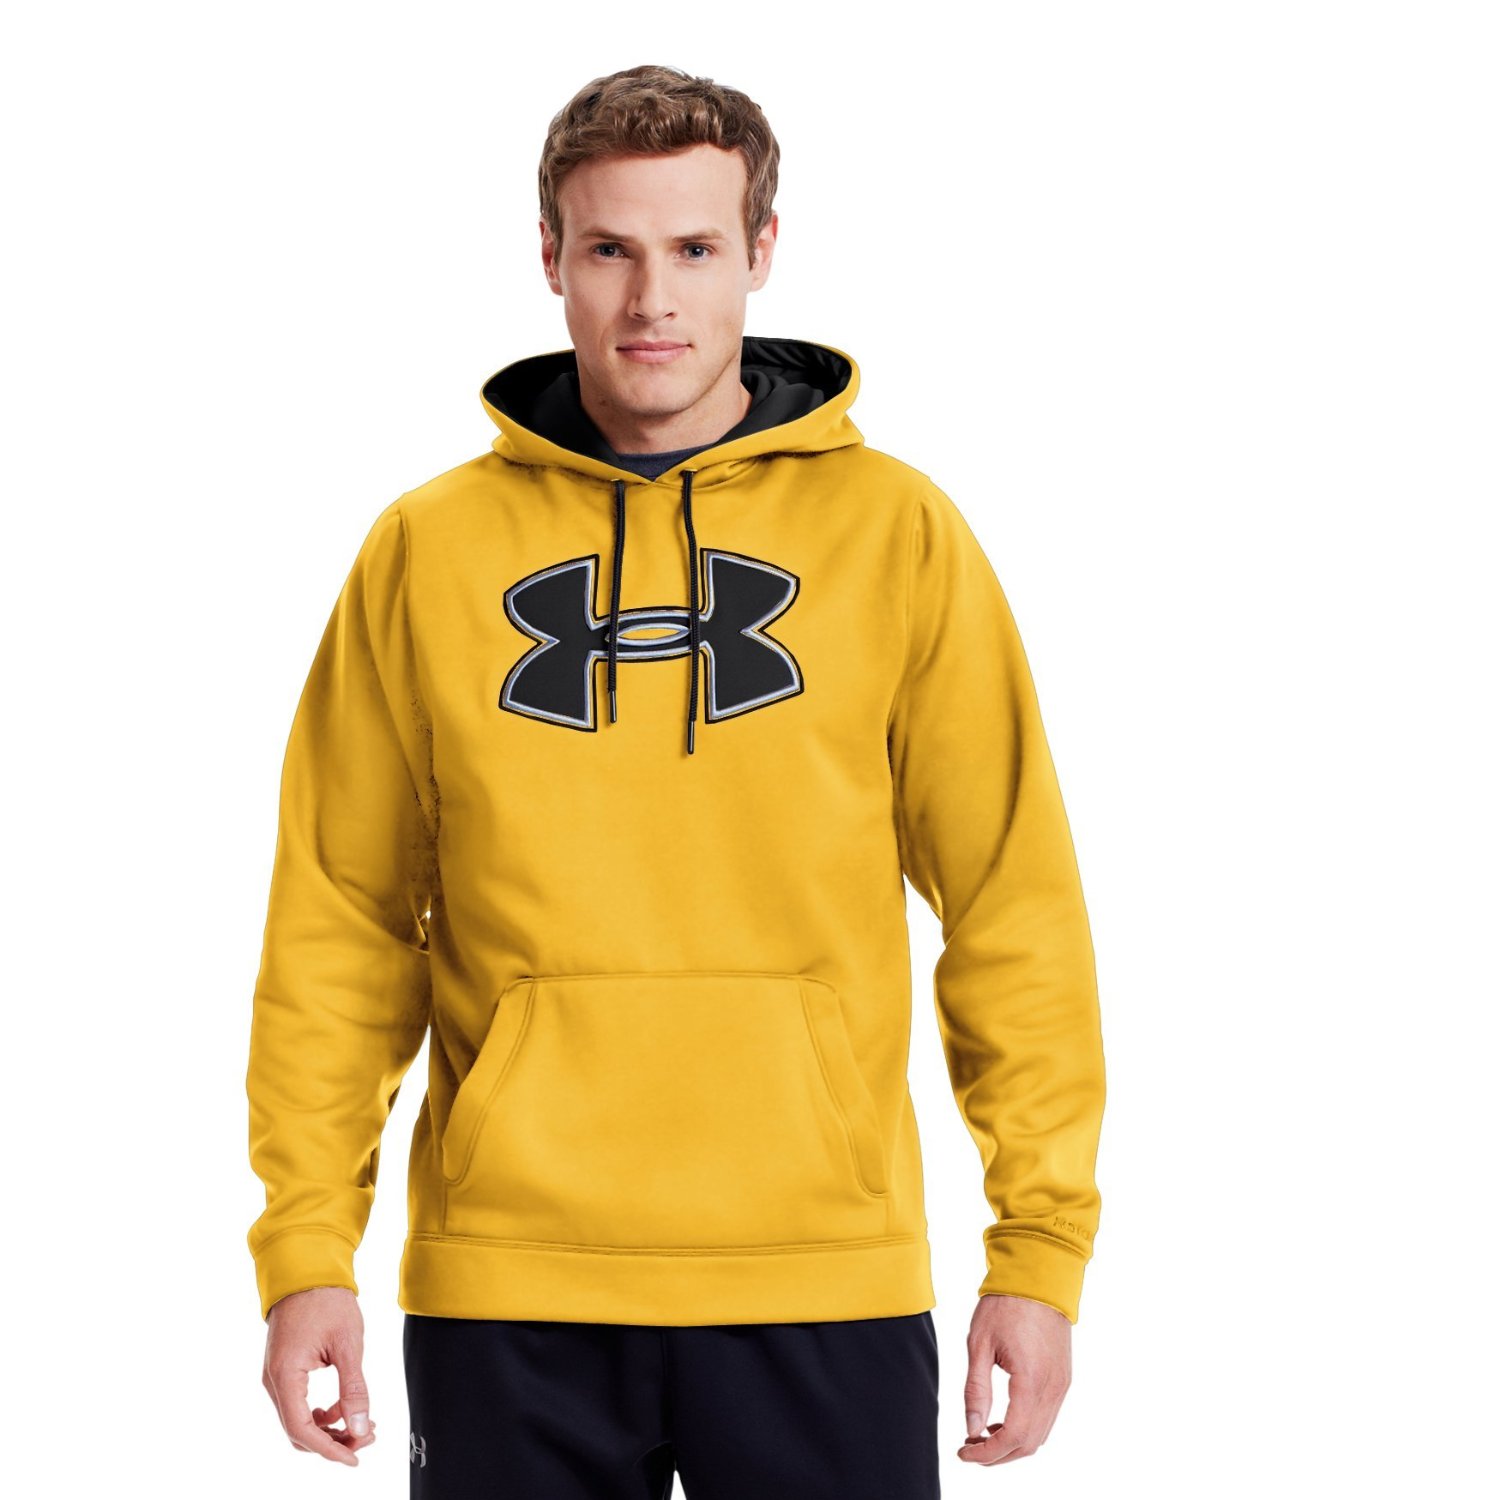 Cheap under armour hoodie yellow Buy 